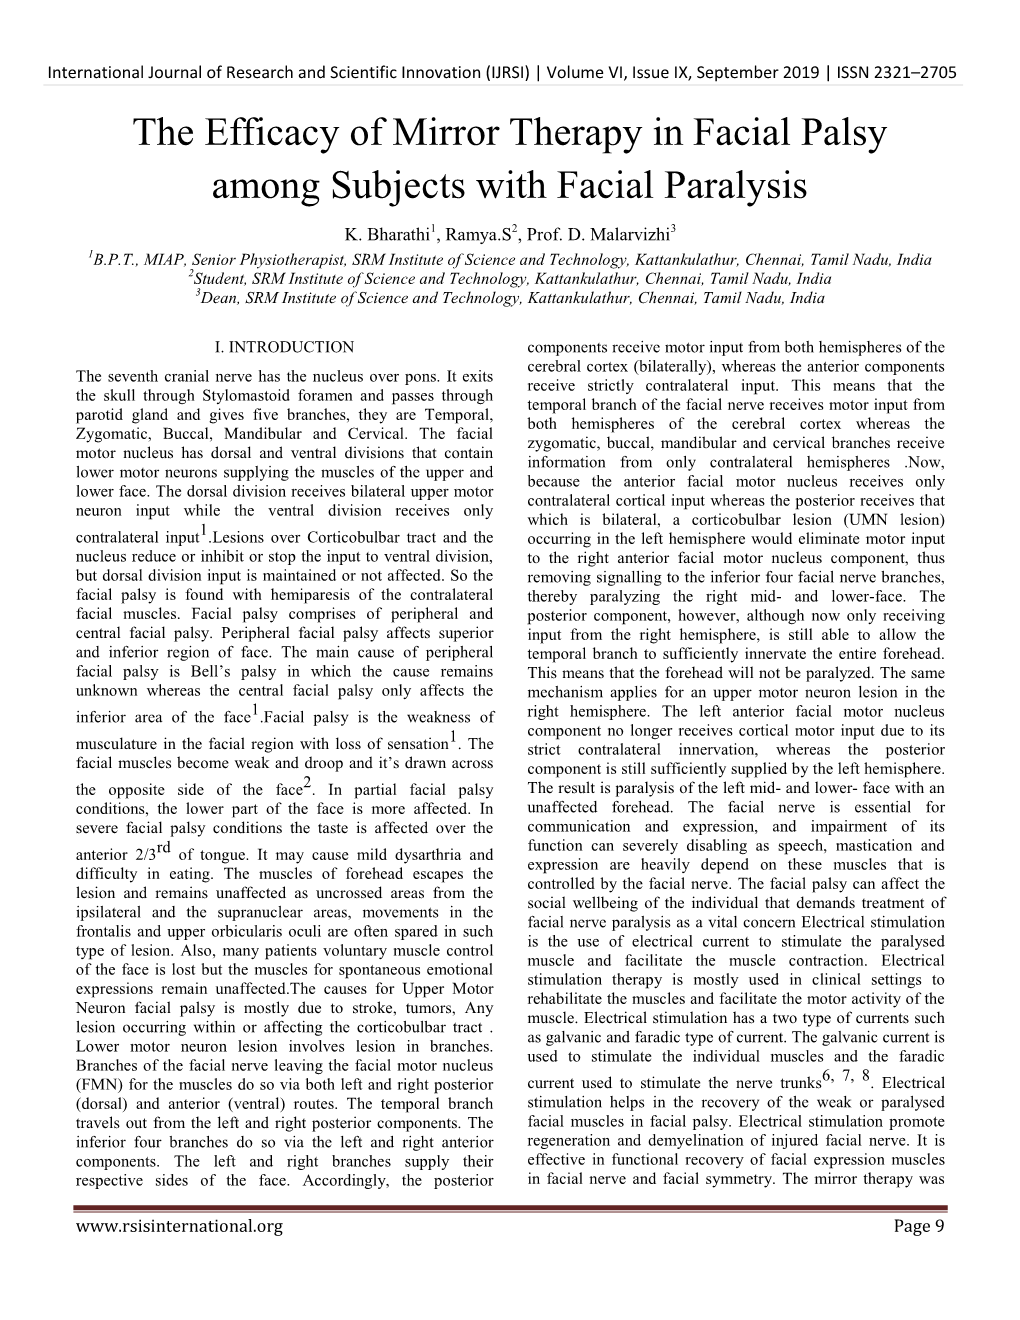 The Efficacy of Mirror Therapy in Facial Palsy Among Subjects with Facial Paralysis